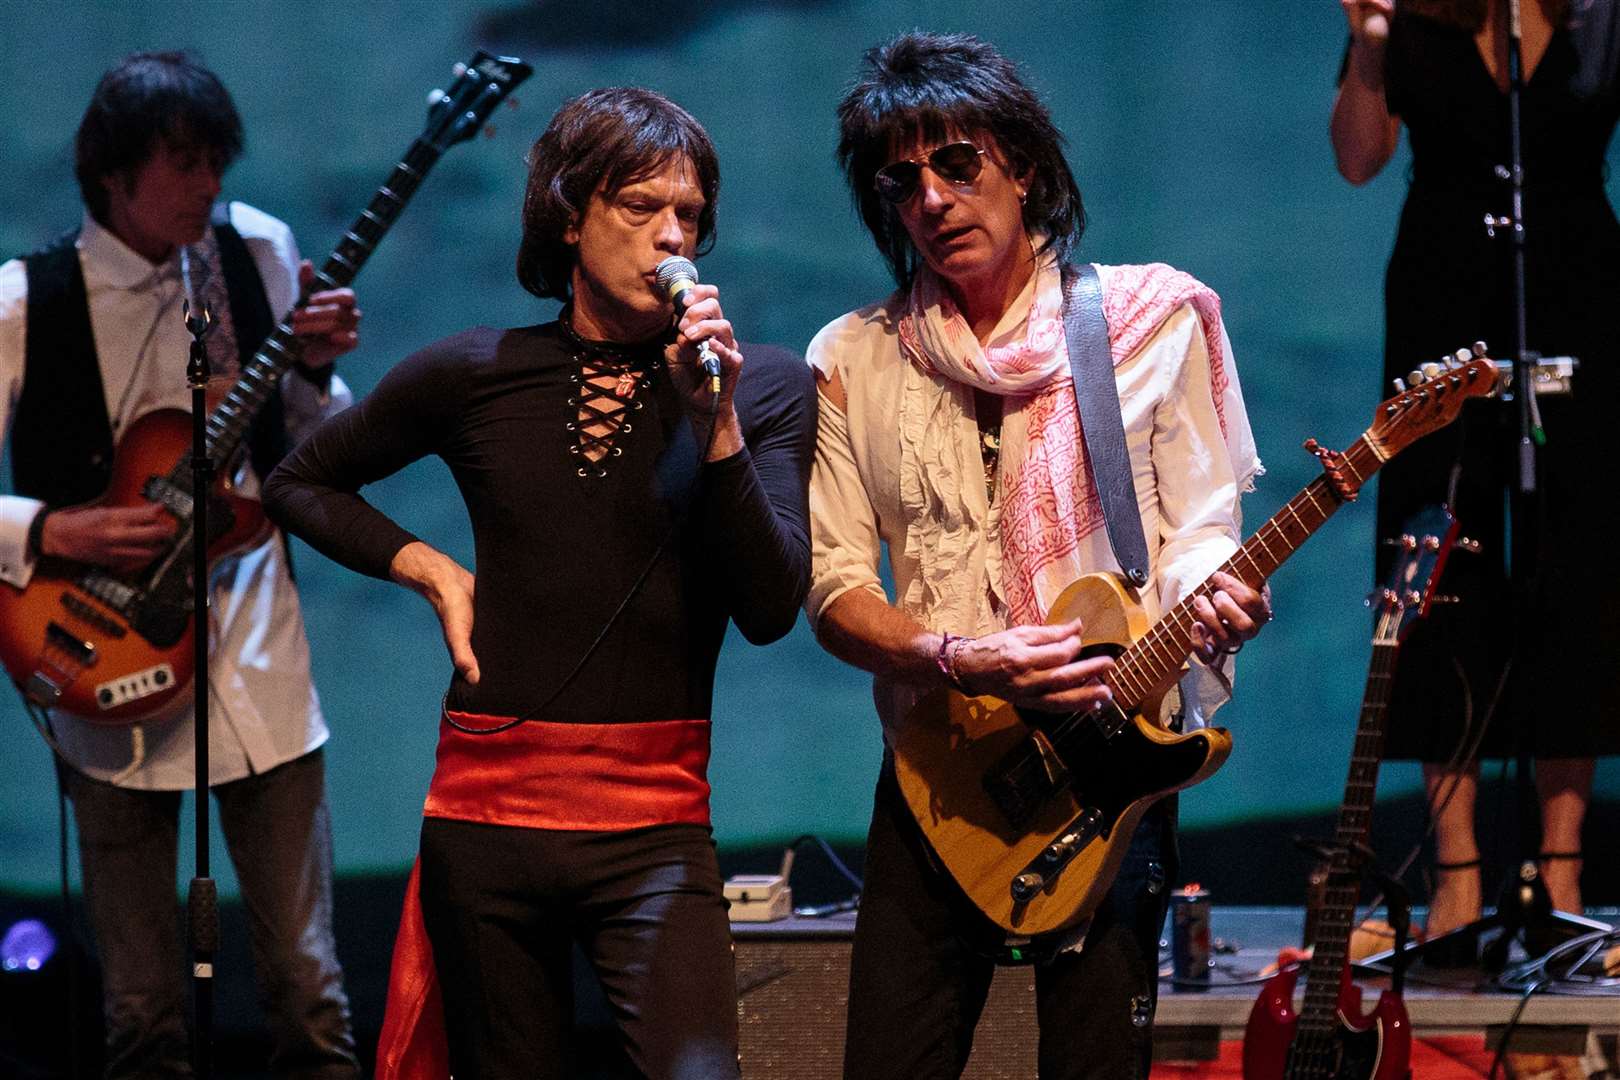 The Rolling Stones Story is a tribute to one of the UK's biggest rock bands. Picture: Rolling Stones Story